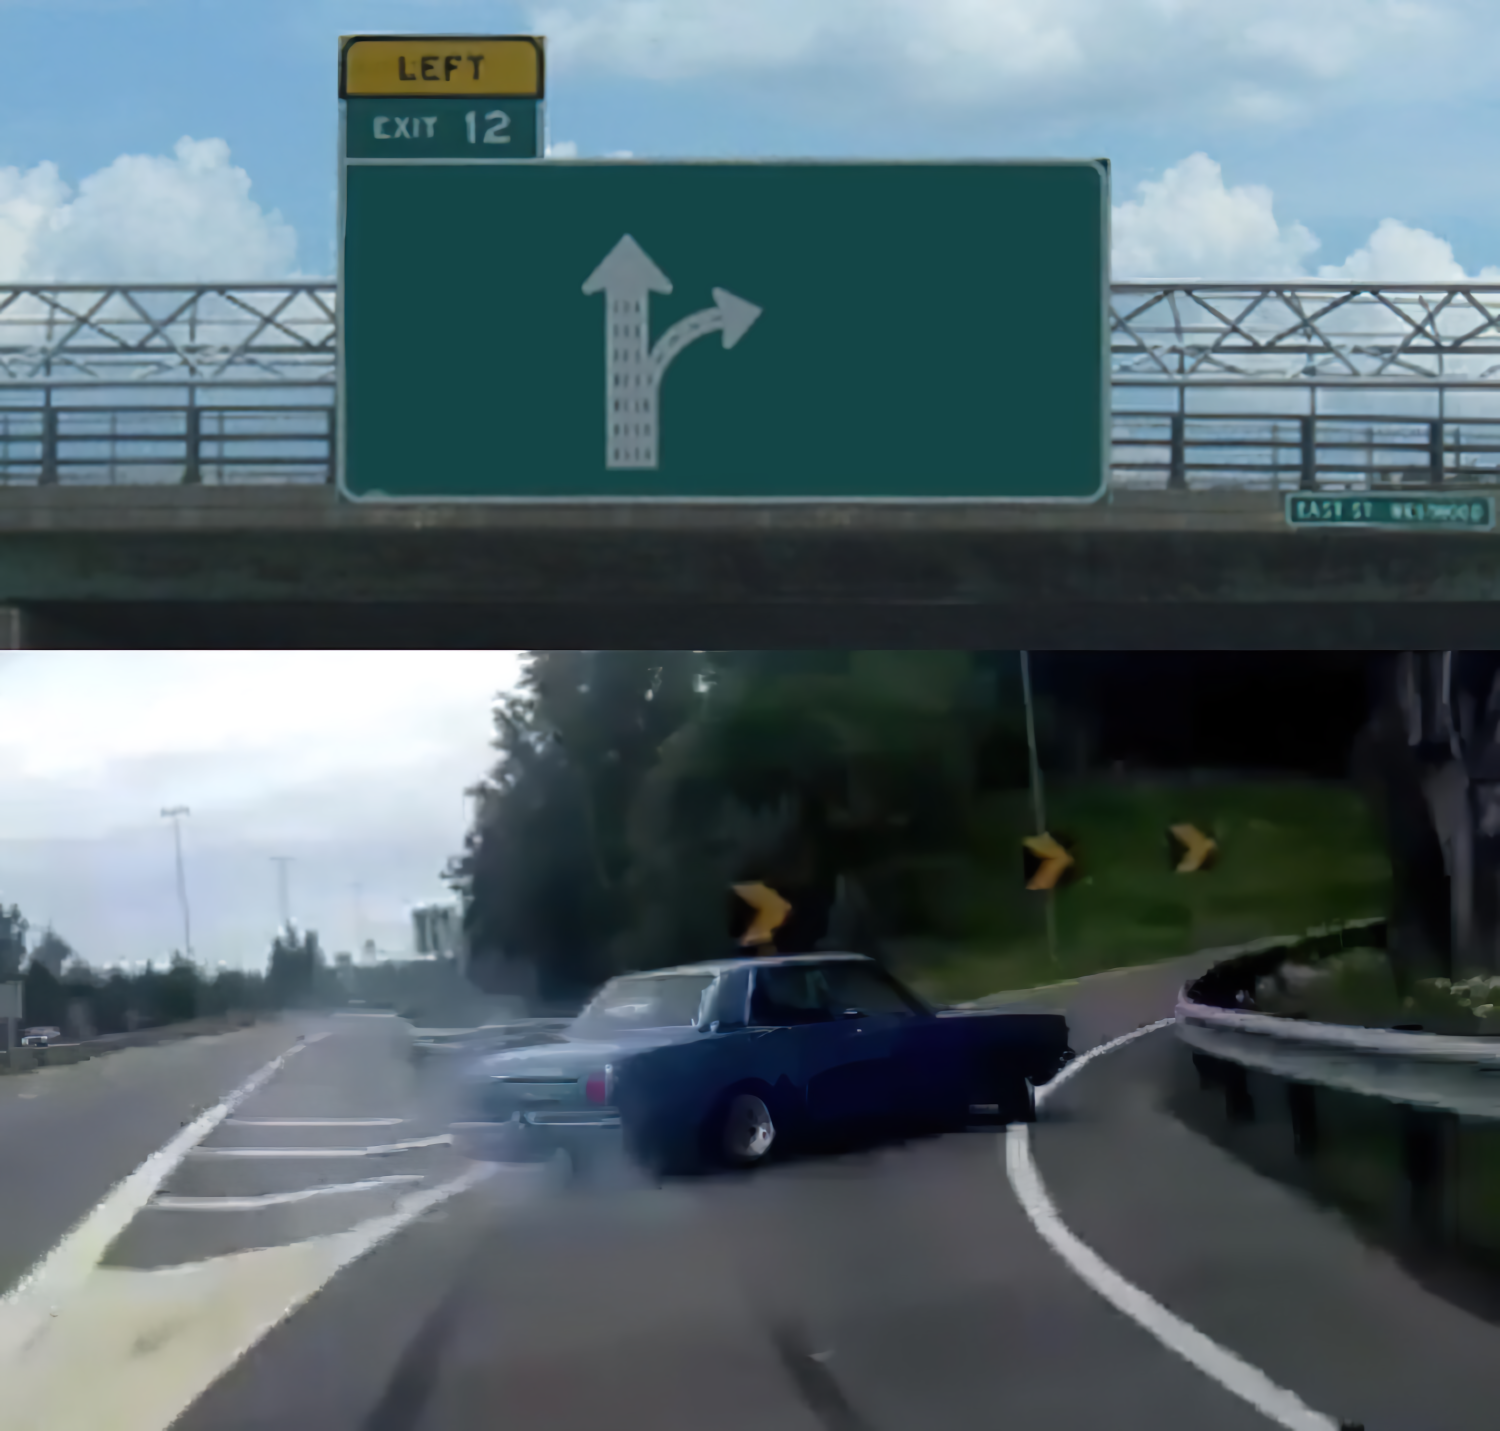 Left Exit 12 Off Ramp Hi-Res Noise-Reduced Blank Meme Template